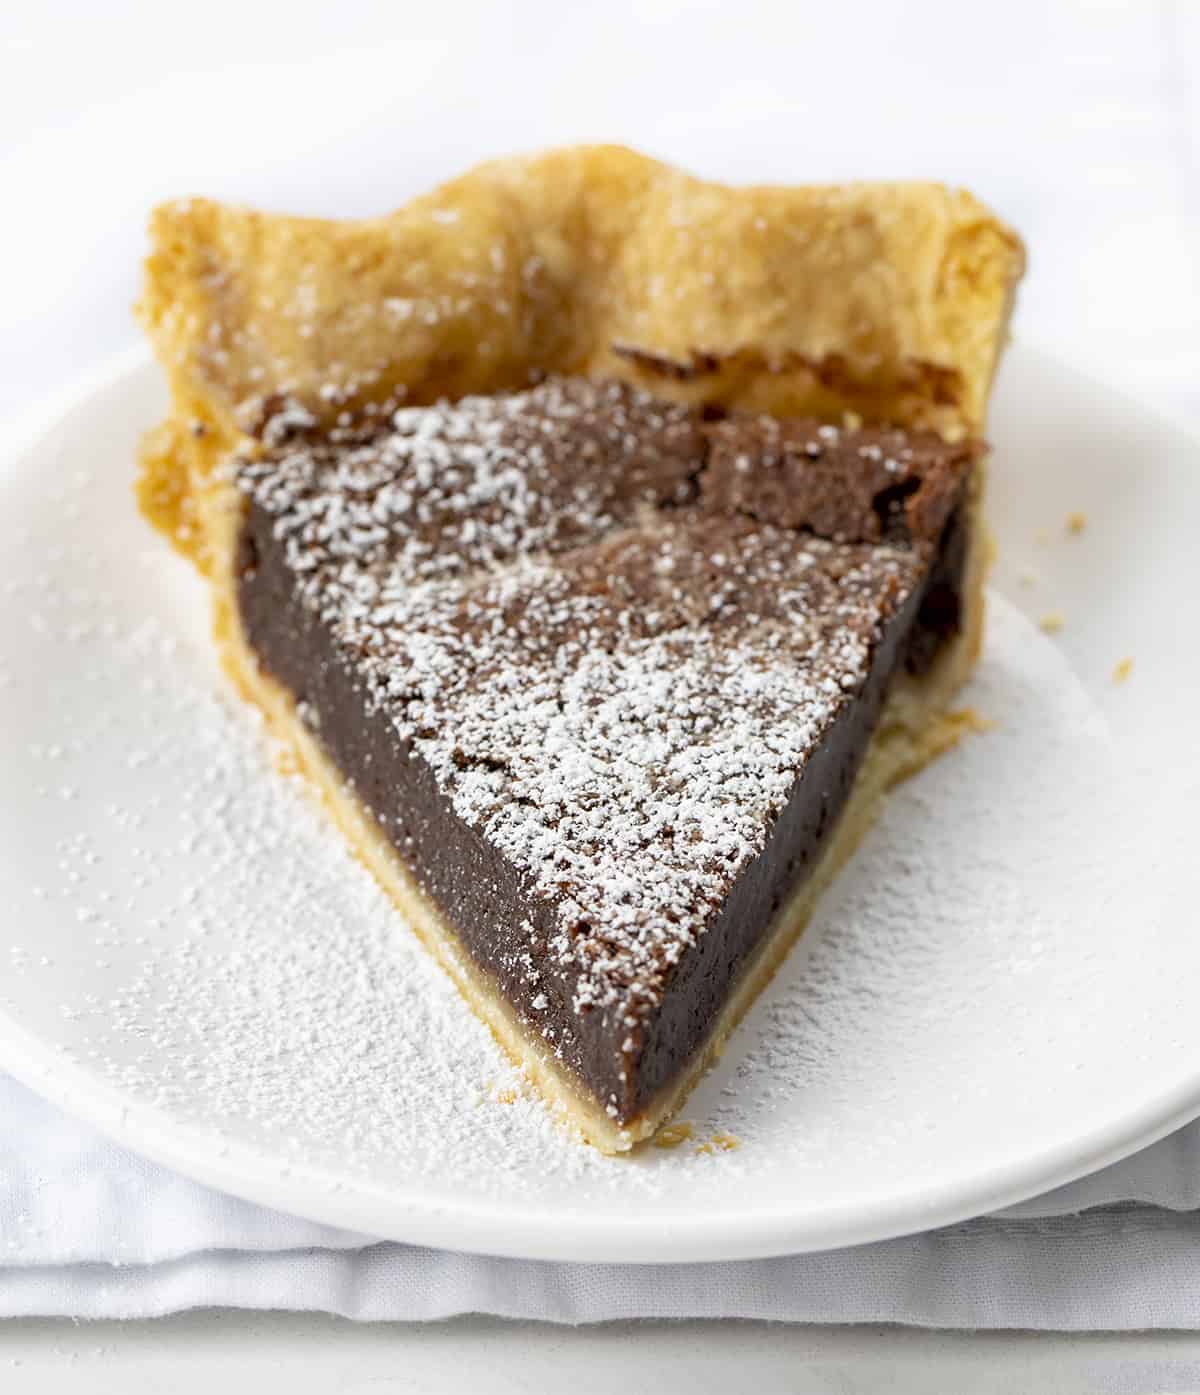 One Piece of Chocolate Cheese Pie on a White Plate